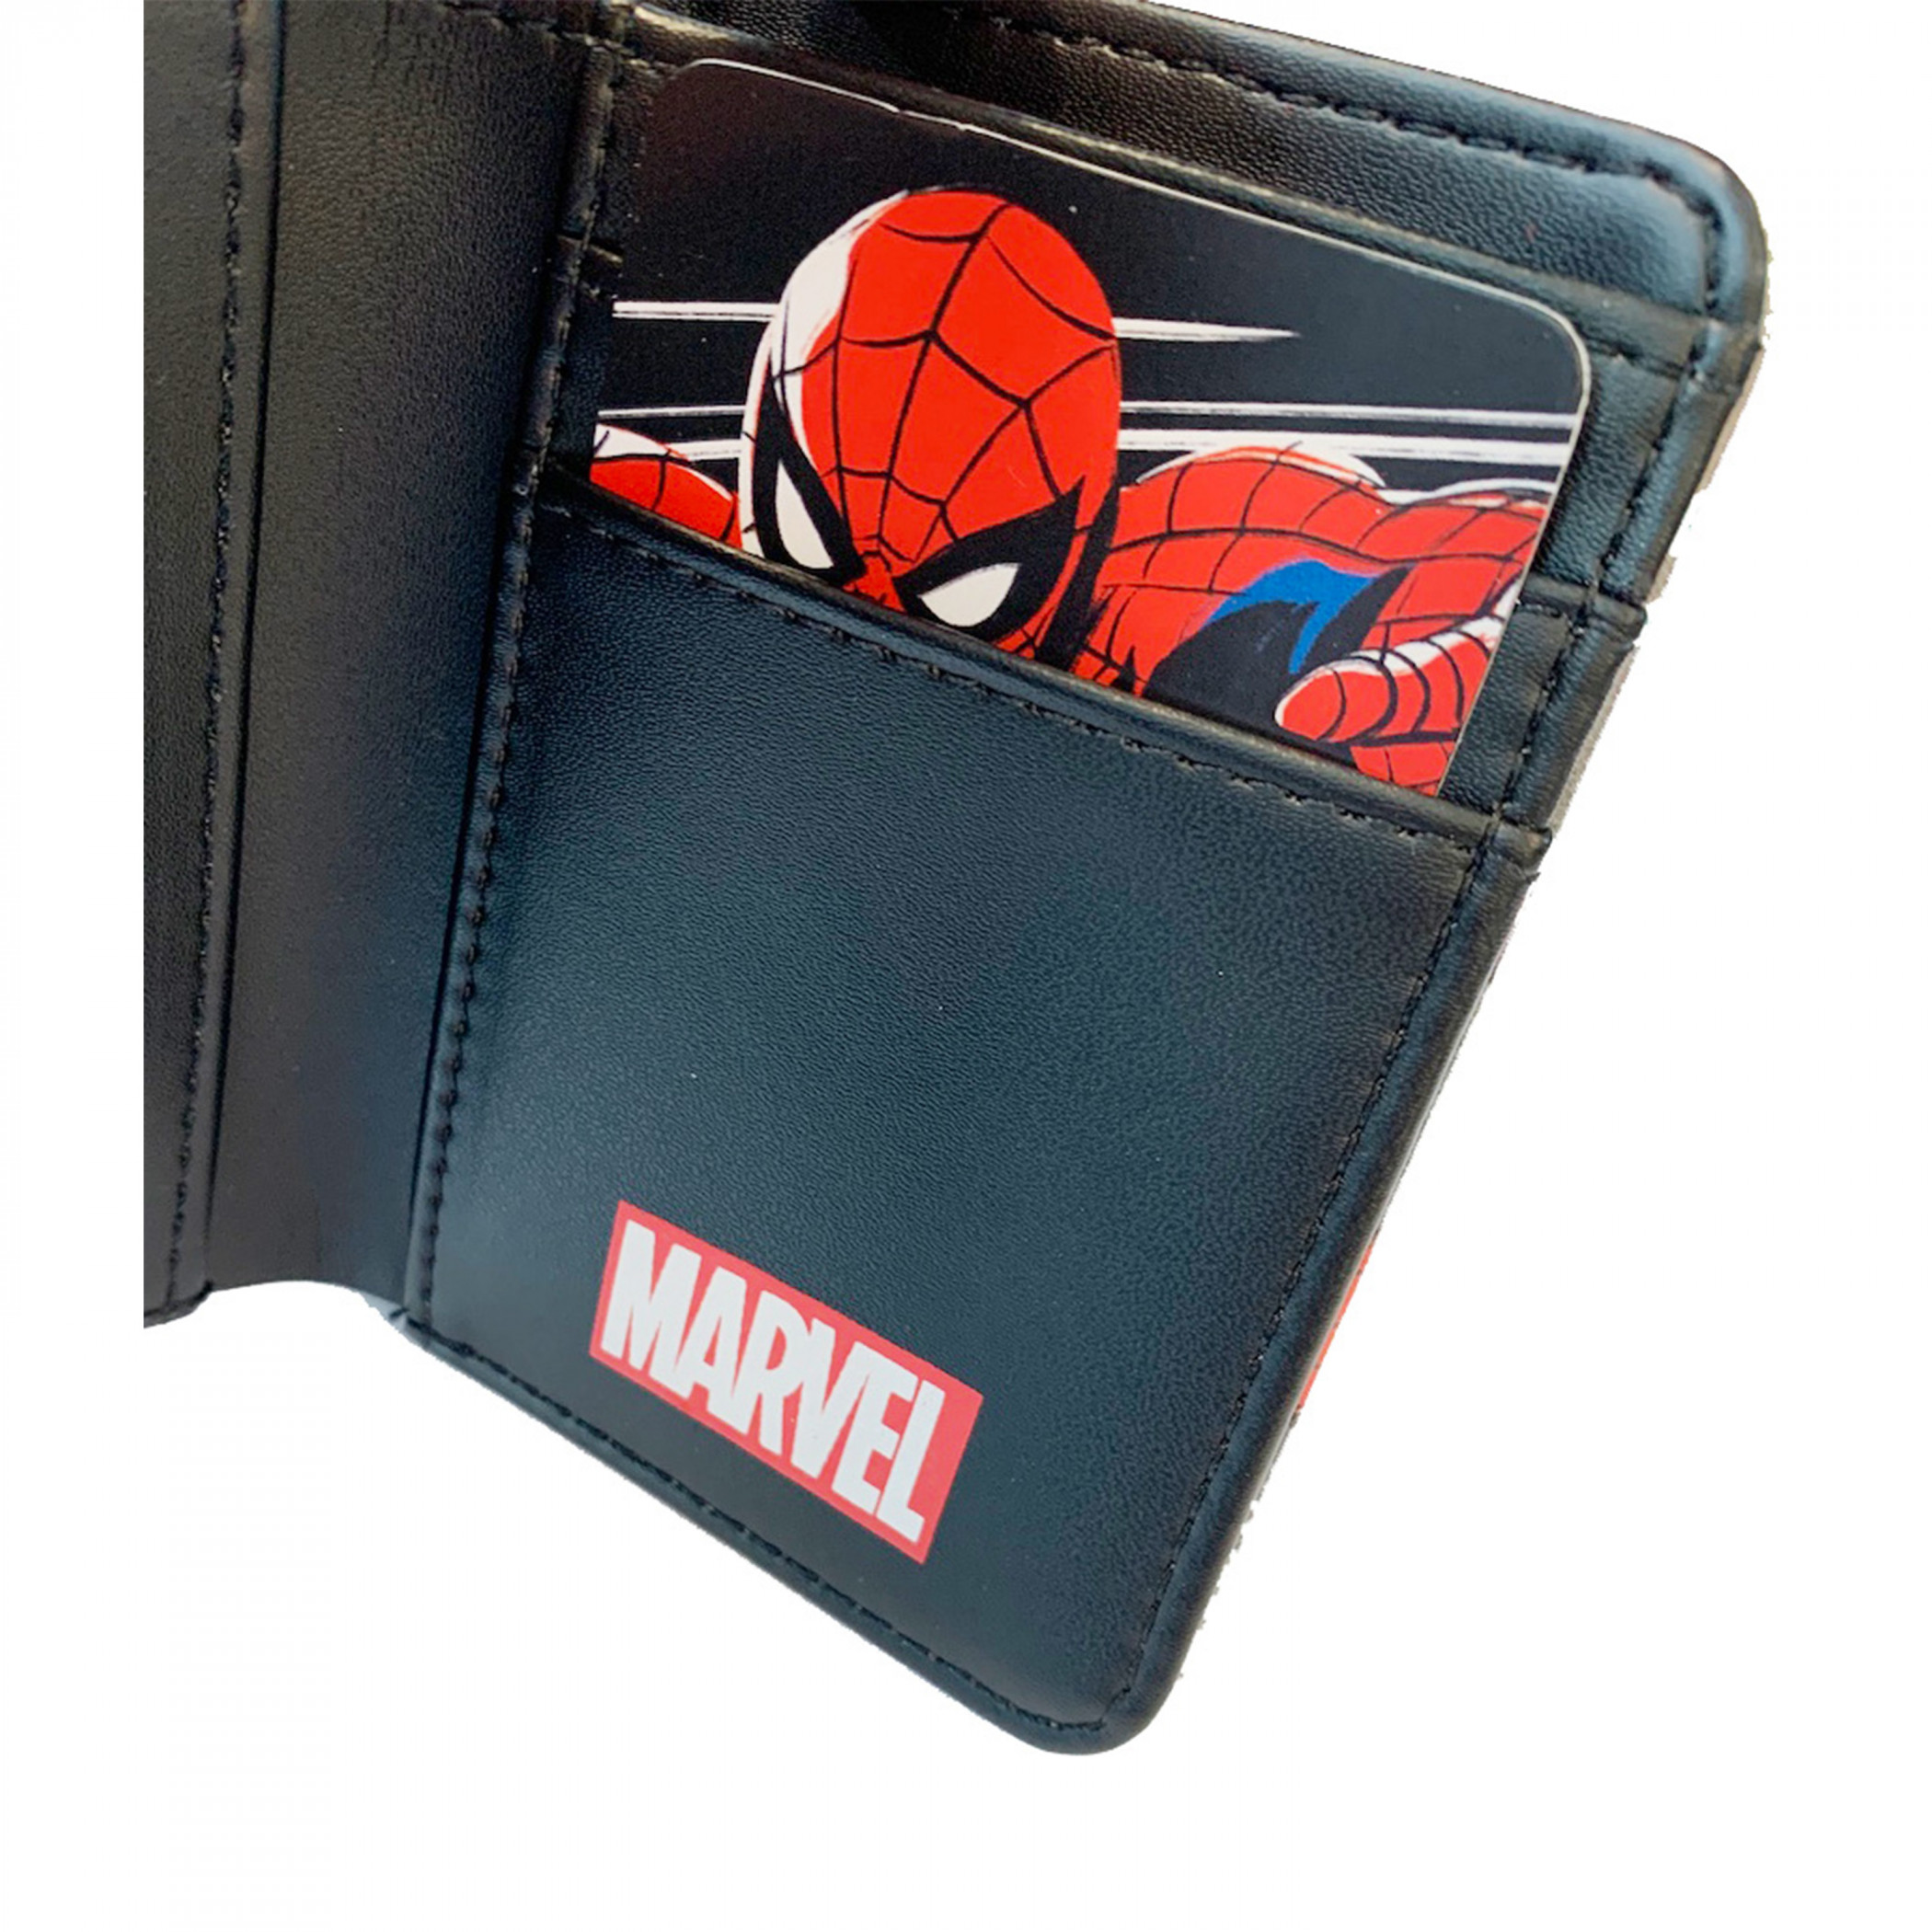 The Amazing Spider-Man City Skyline Trifold Wallet